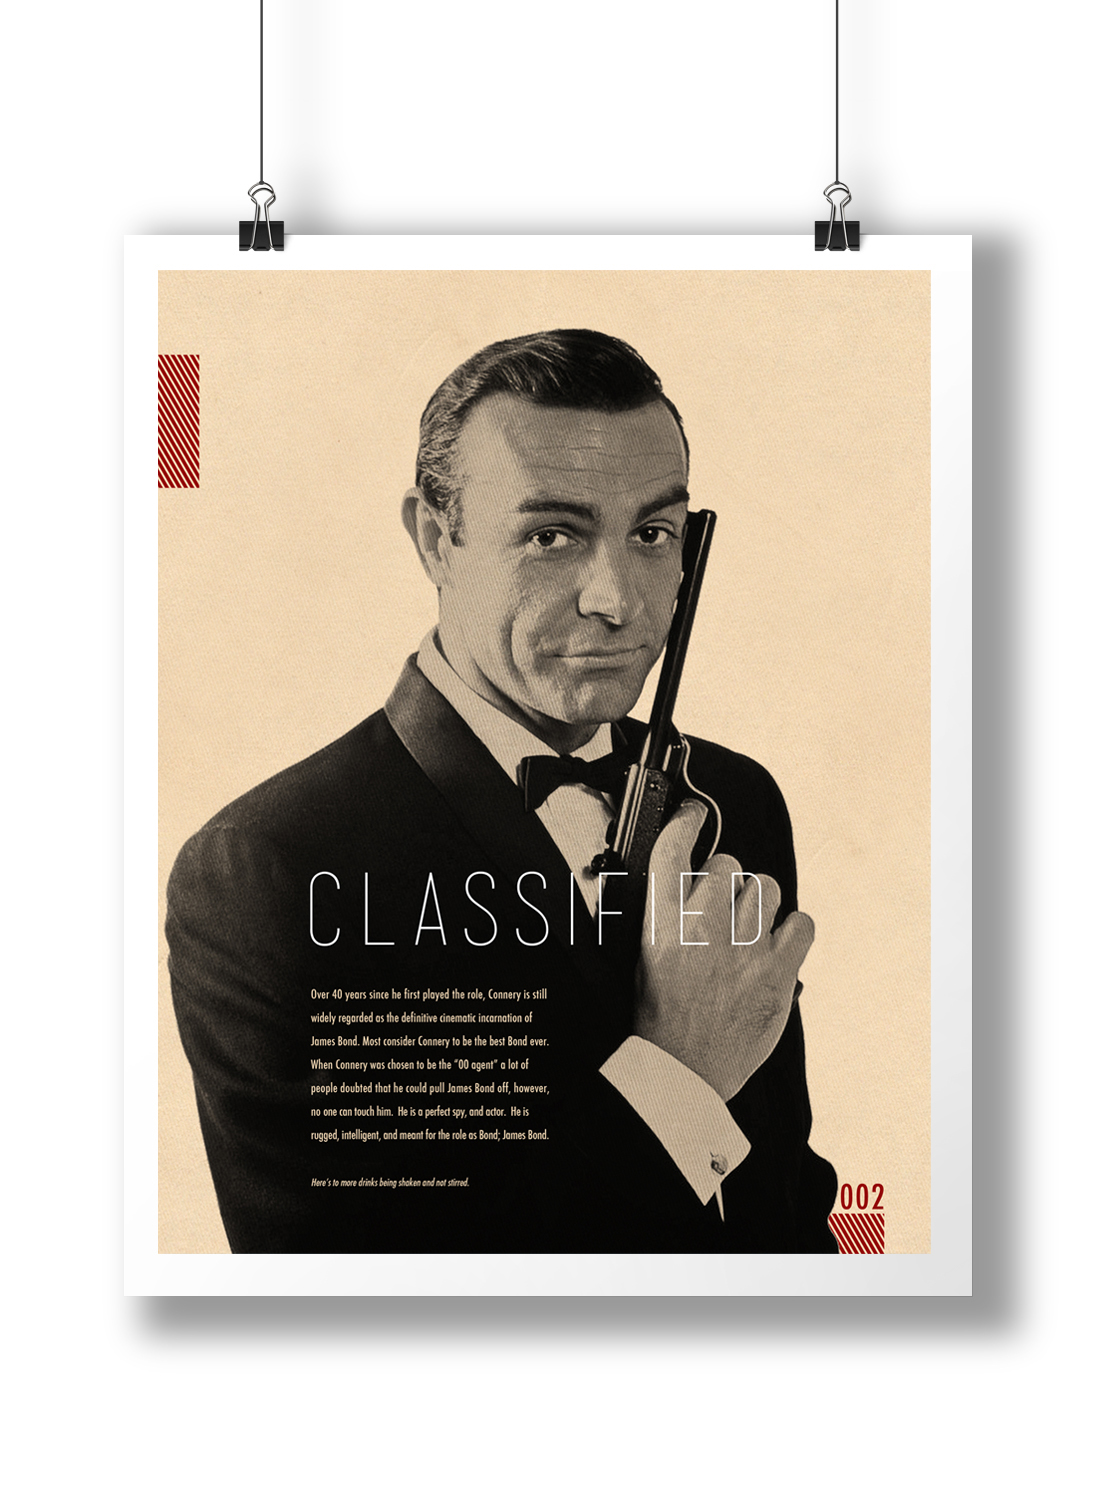 poster class Classic art Audrey Hepburn johnny cash sean connery james bond Movies Marilyn Monroe NEIL ARMSTRONG black and white print layout Layout